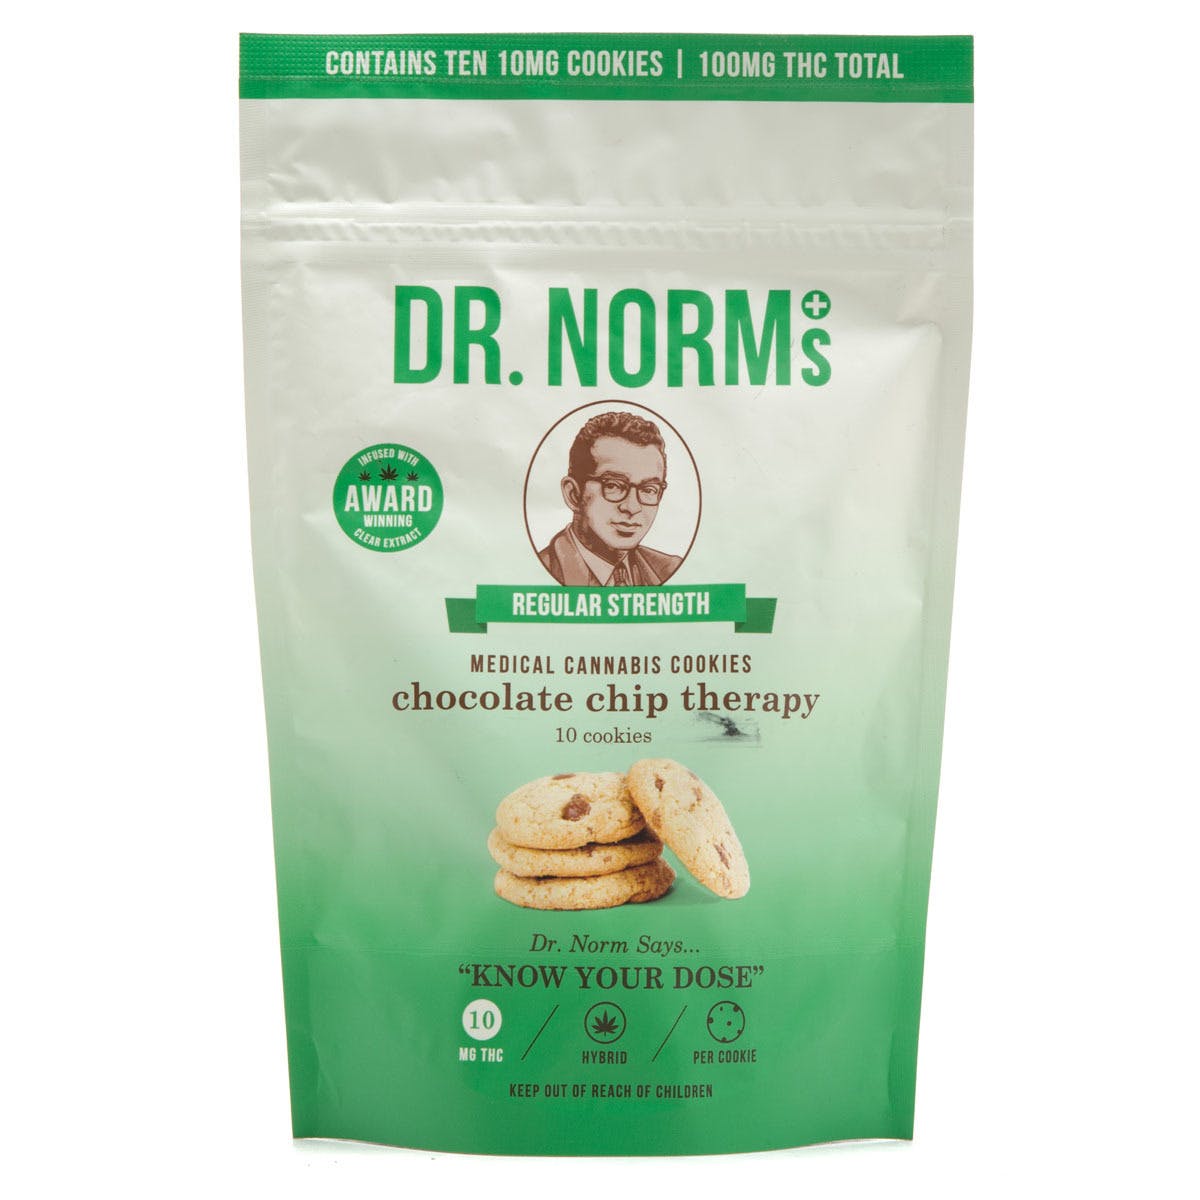 marijuana-dispensaries-the-farmacy-westwood-in-los-angeles-10mg-choco-chip-therapy-bag-100mg-total